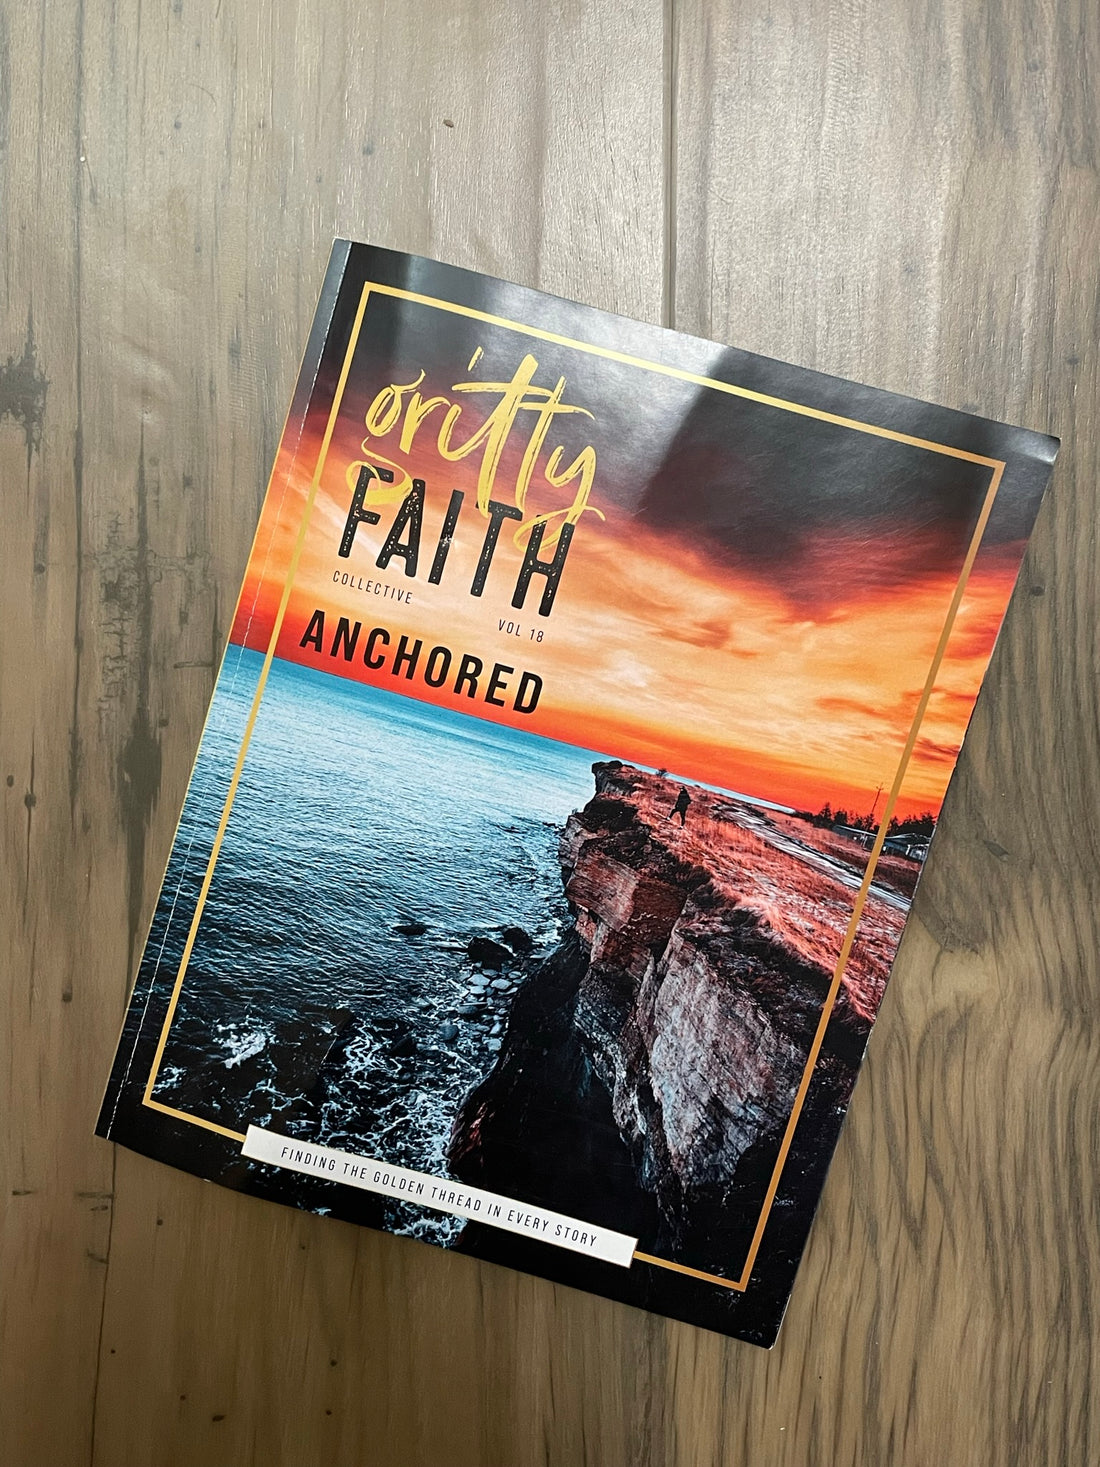 From the Editor about Gritty Faith: Anchored